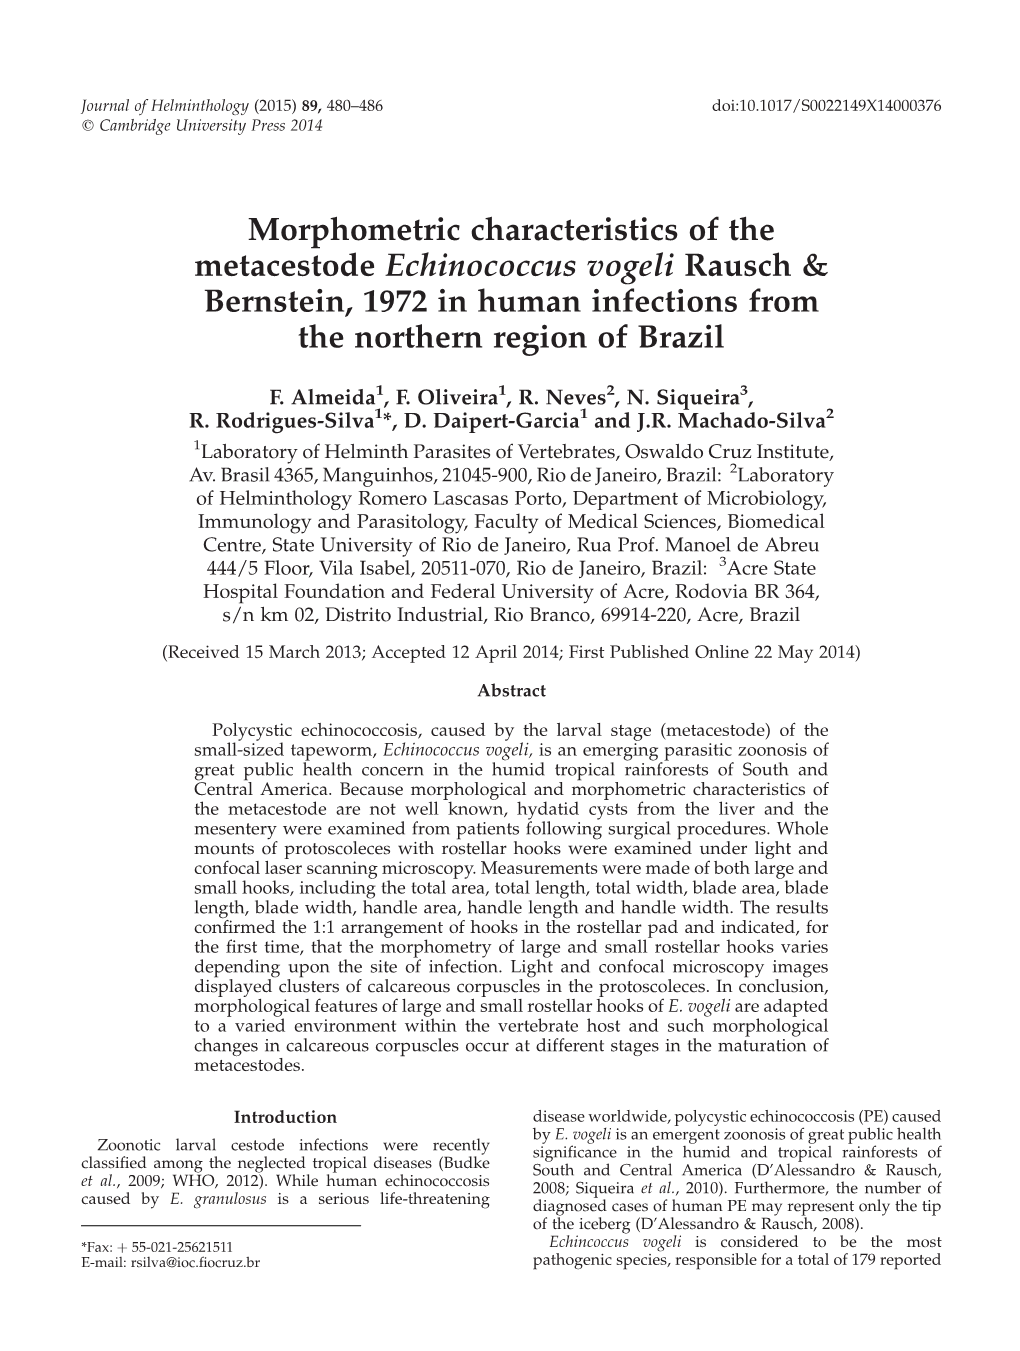 Morphometric Characteristics of the Metacestode Echinococcus Vogeli Rausch & Bernstein, 1972 in Human Infections from the Northern Region of Brazil